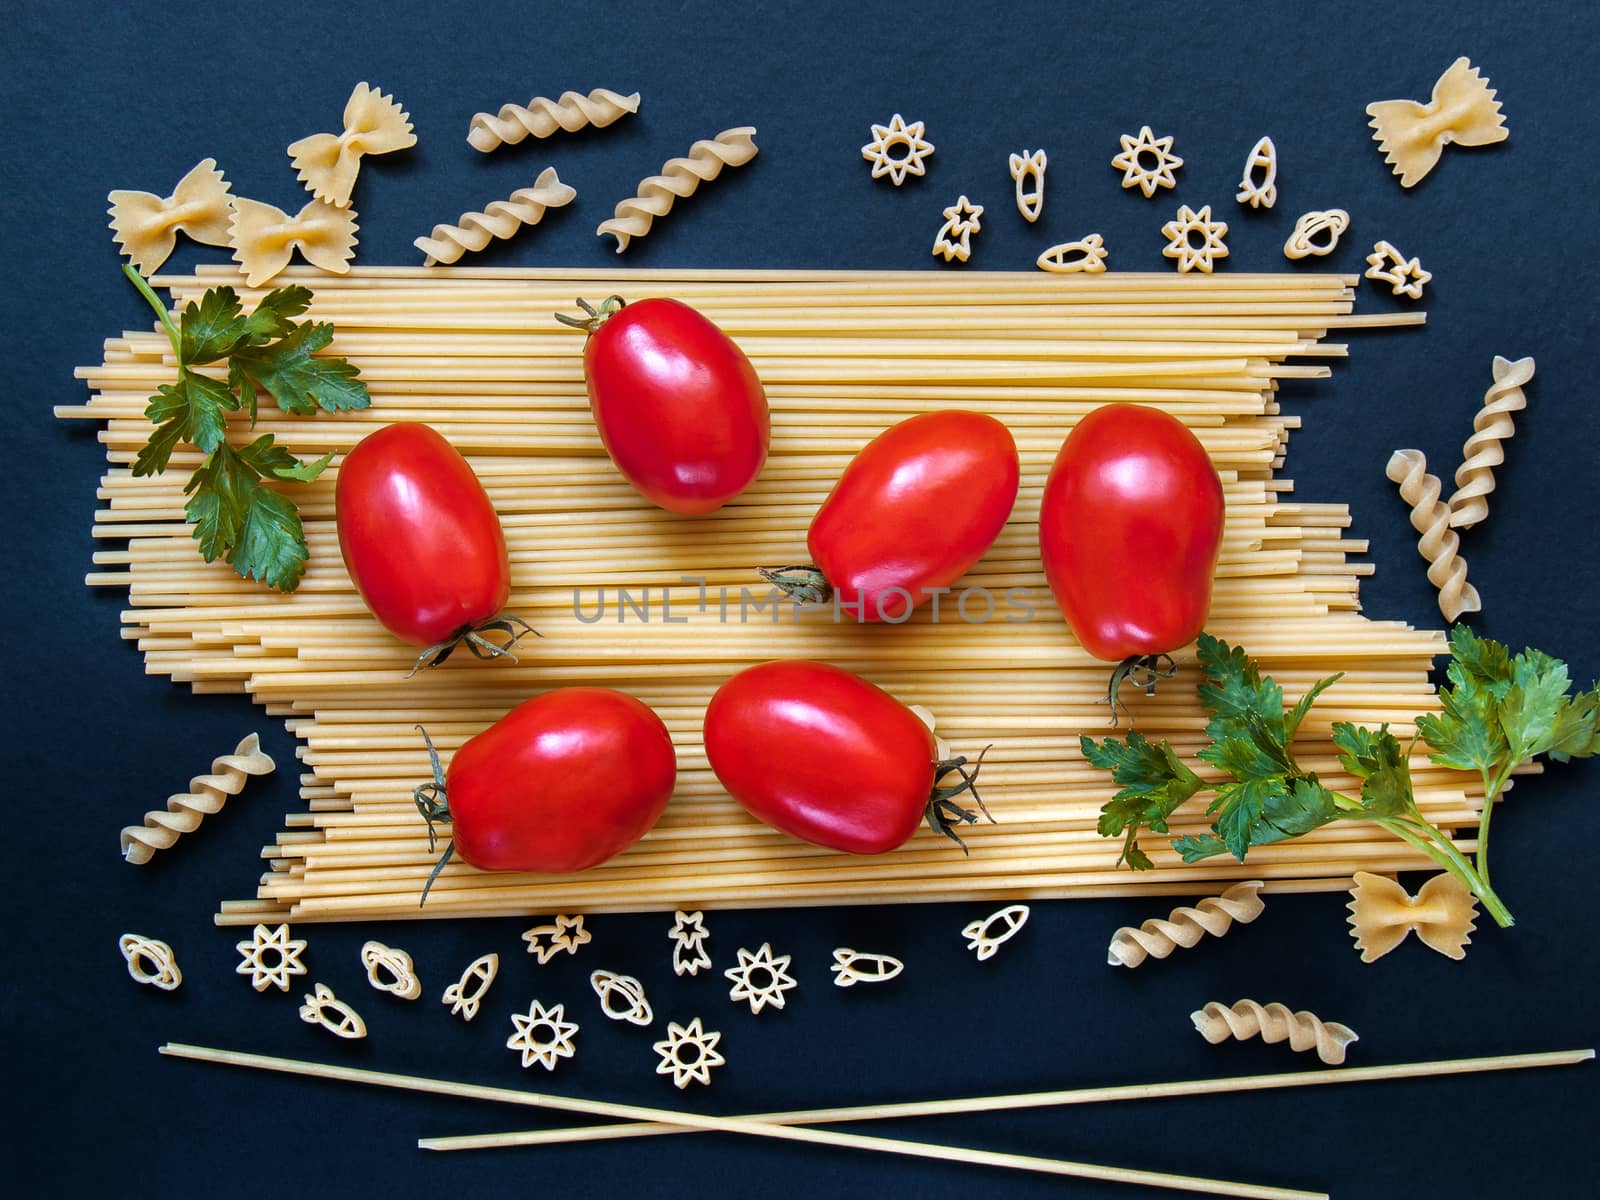 Spaghetti with tomatoes, greens and other figured pasta in the form of bows, spirals, figures of rockets and stars for cooking on a dark background